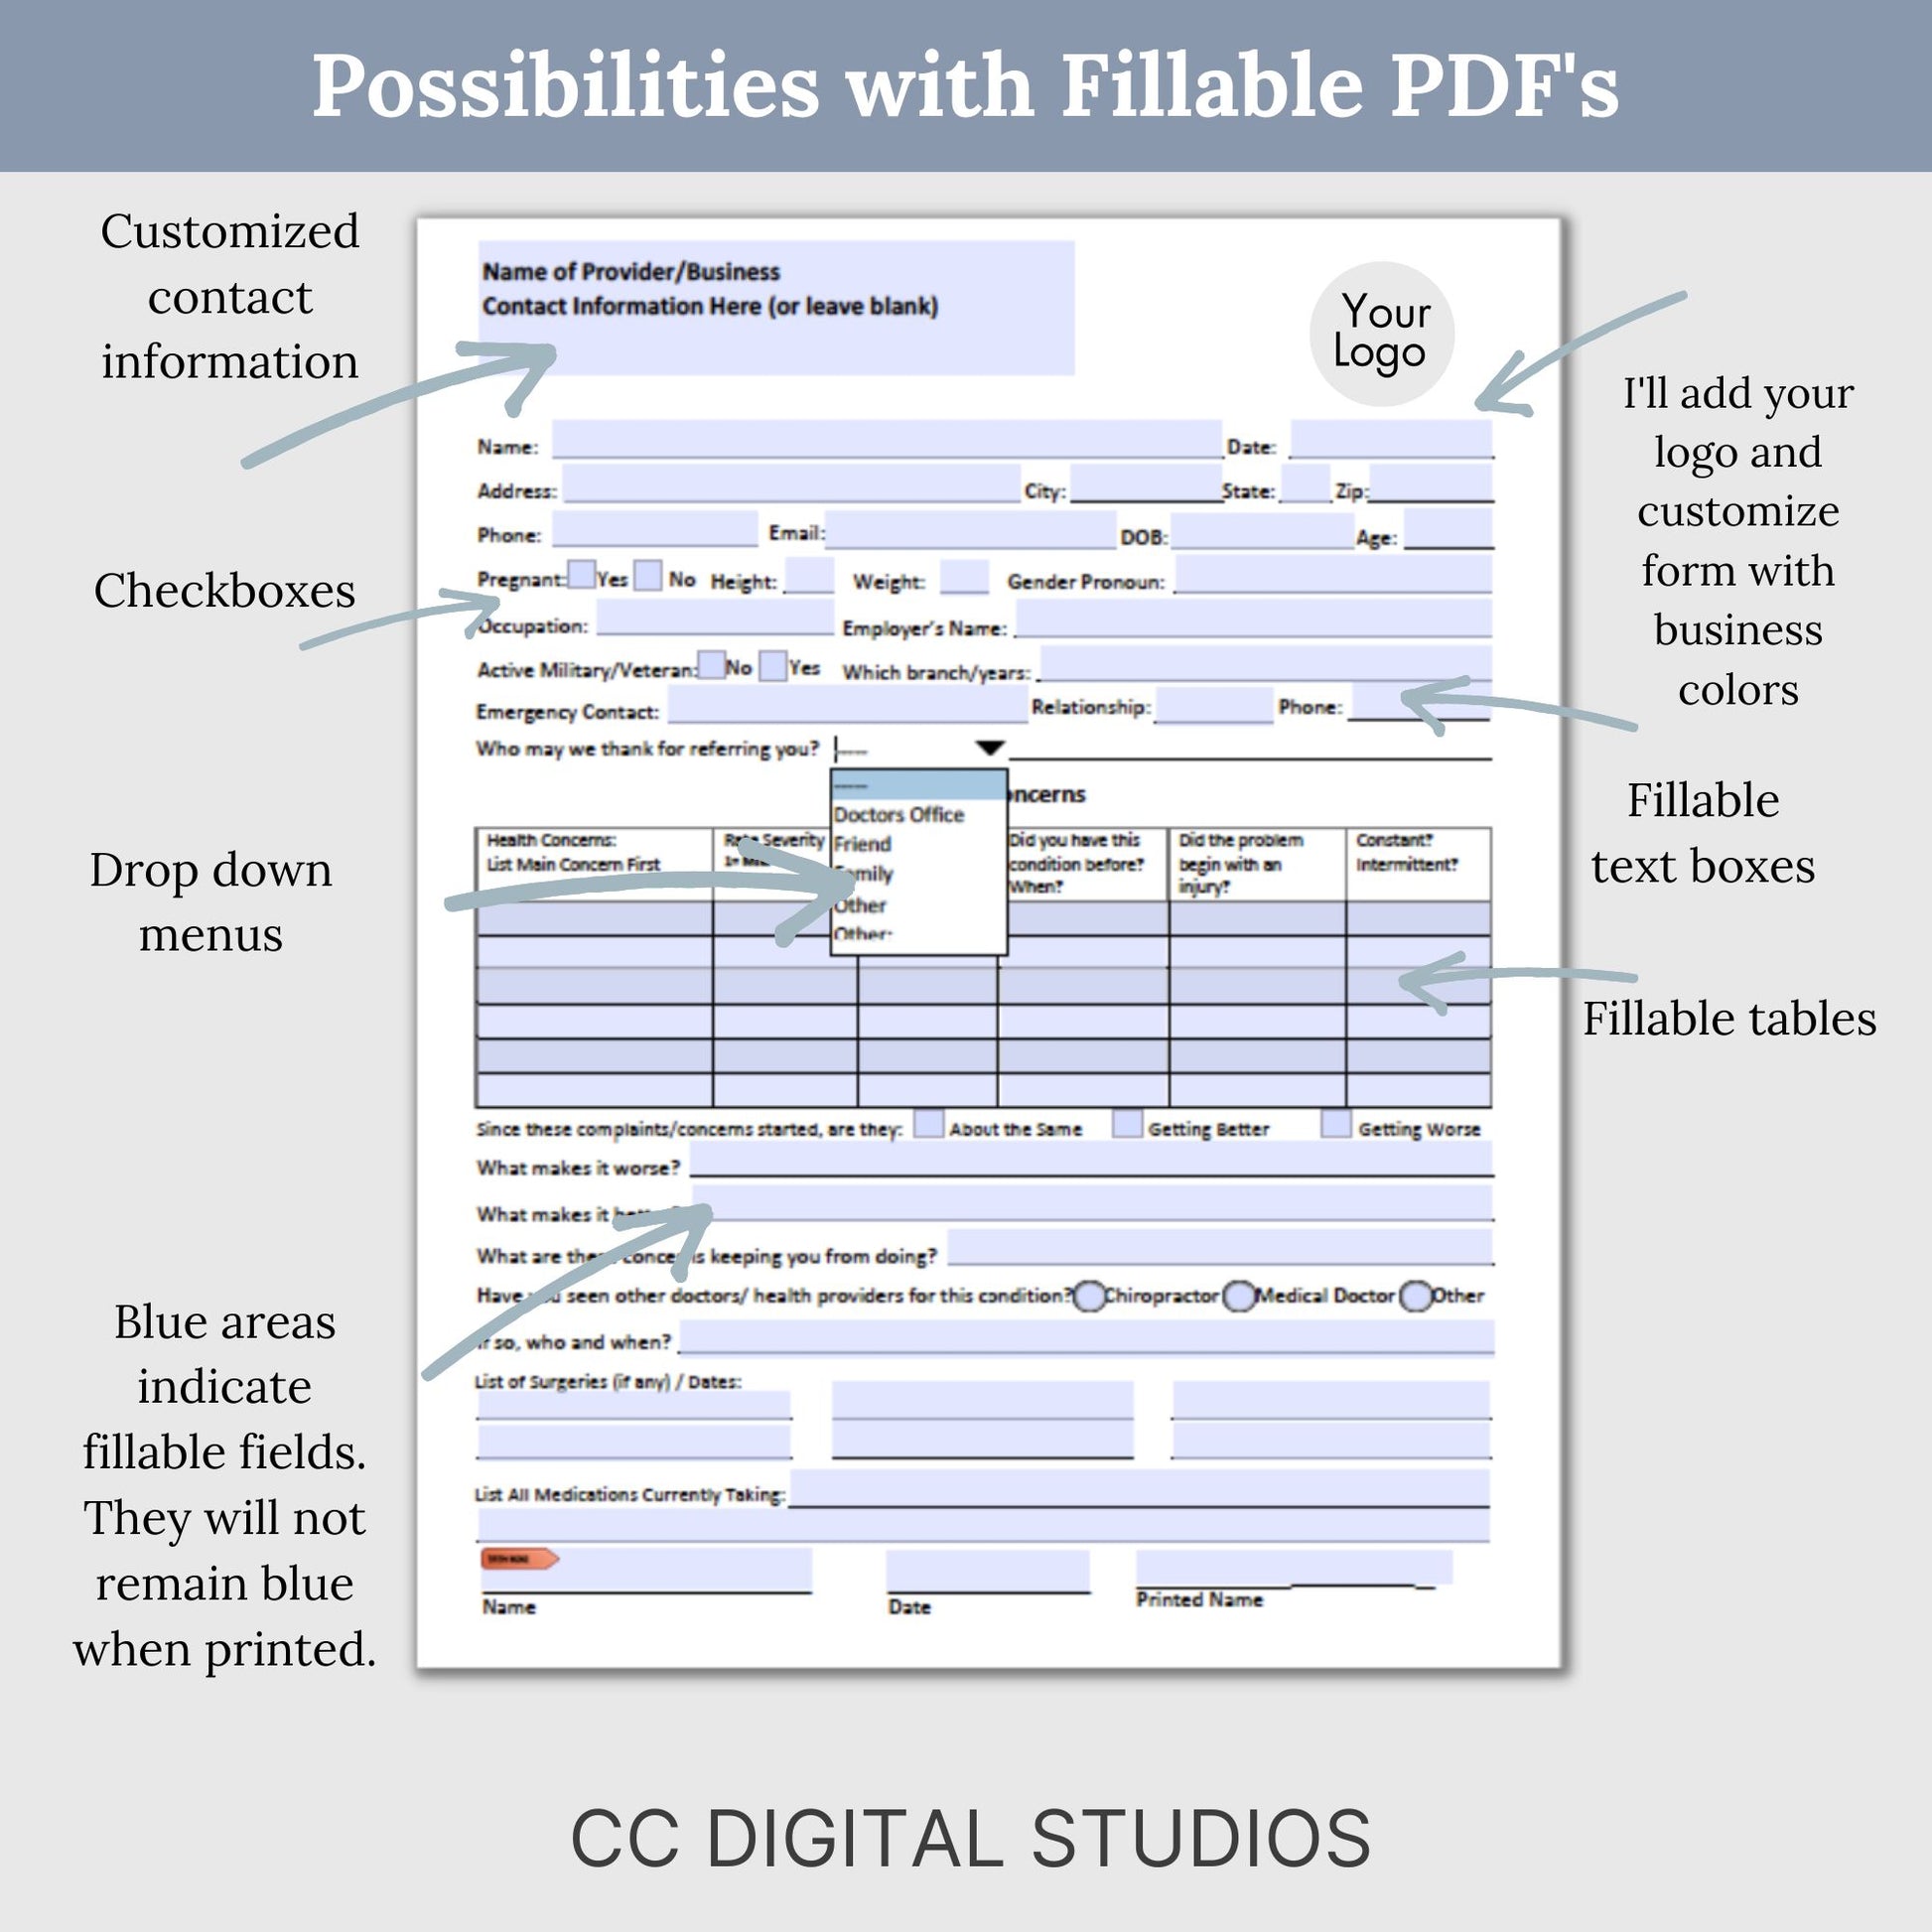 PDF Conversion Package. Transform any existing WORD or Google Doc into a professional fillable PDF hassle-free. This package covers up to 3 pages